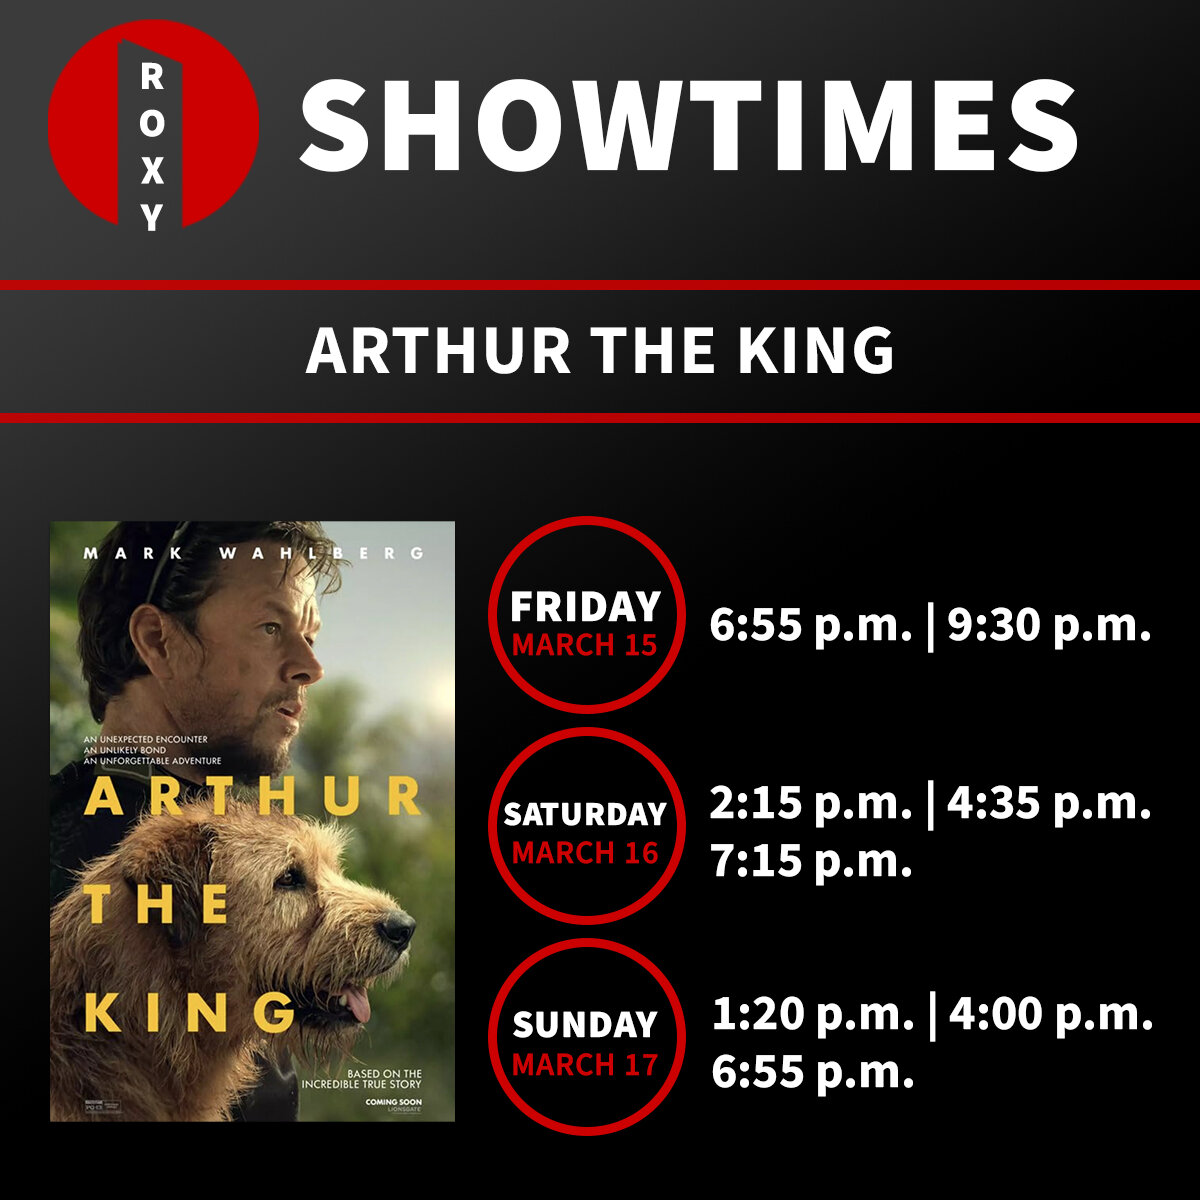 👀We see some must-see movies in this week's lineup!

Saturday's showtimes look a little different due to an event we are co-hosting, but we will still have the popcorn and movies ready for you! (**Imaginary's 5:05pm showtime will still be priced at 